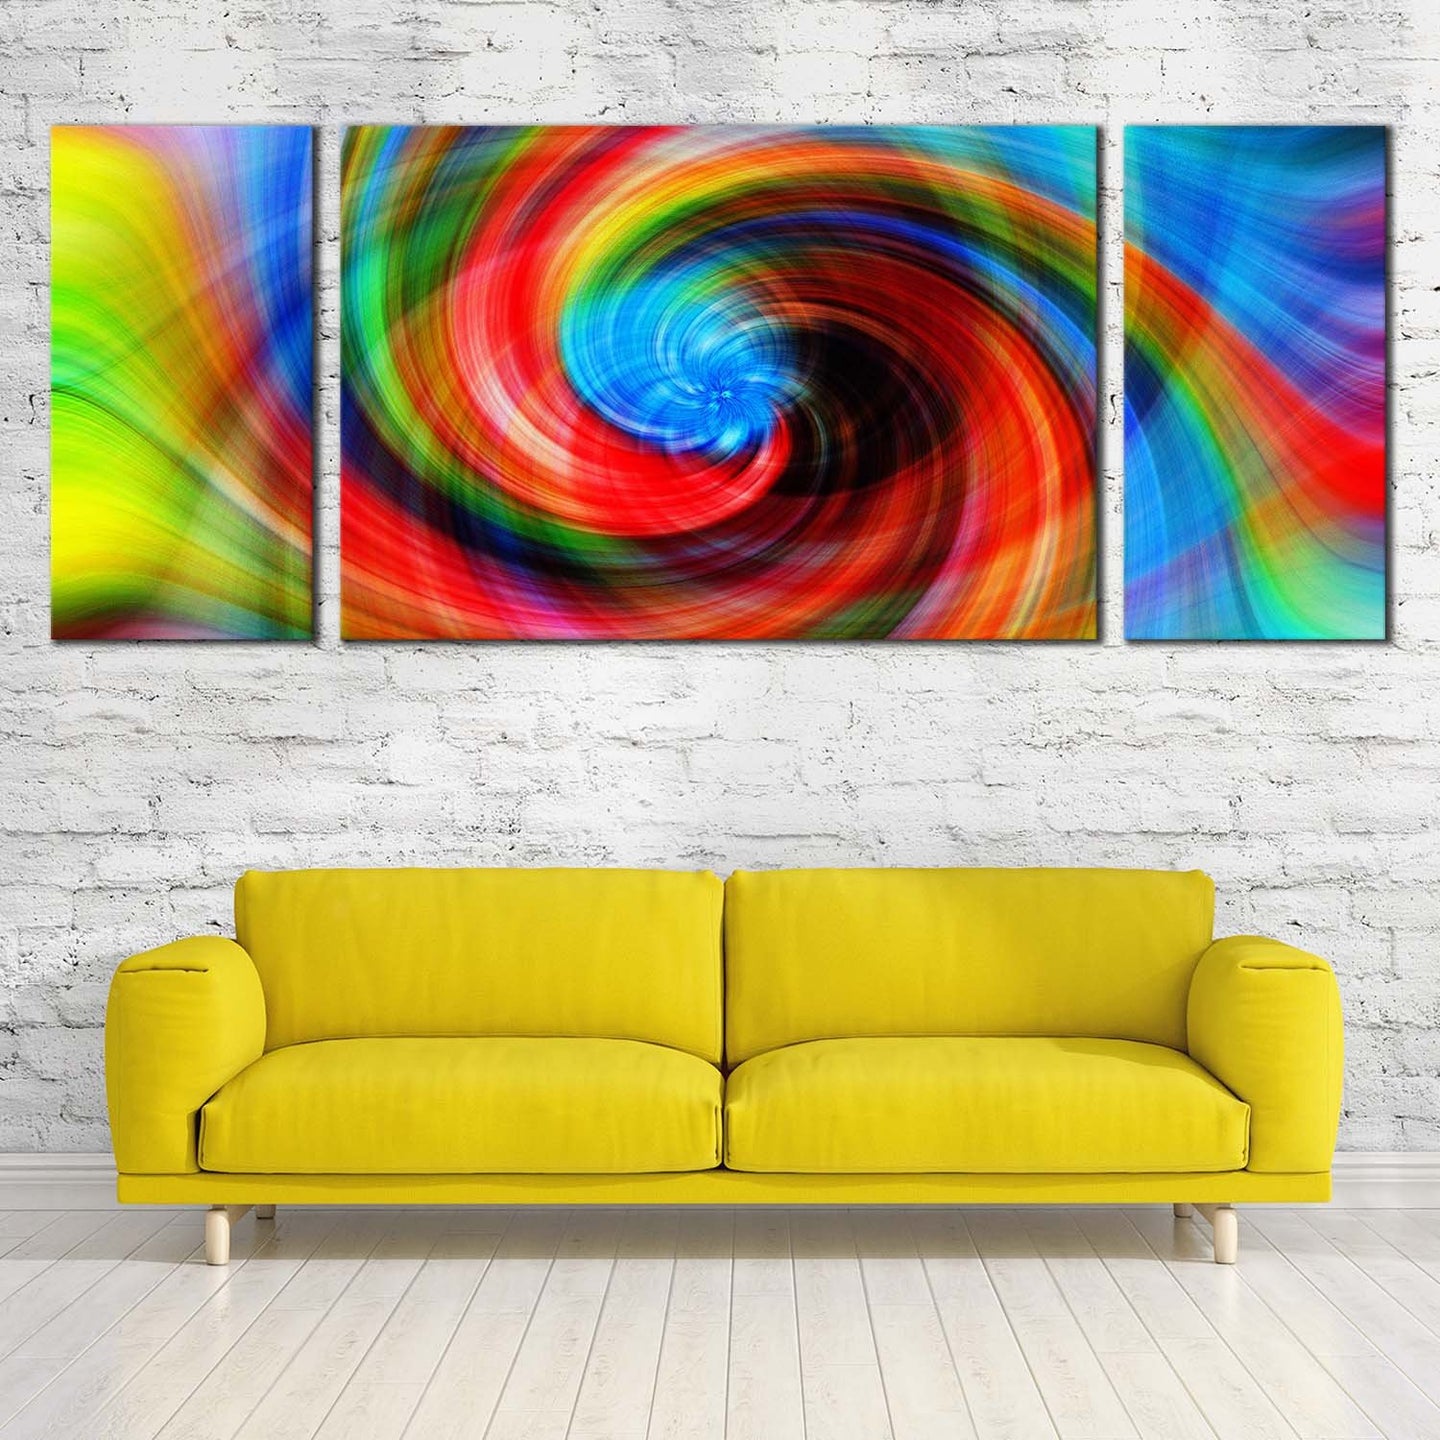 Modern Abstract Canvas Wall Art, Colorful Abstract Spiral 3 Piece Canv ...